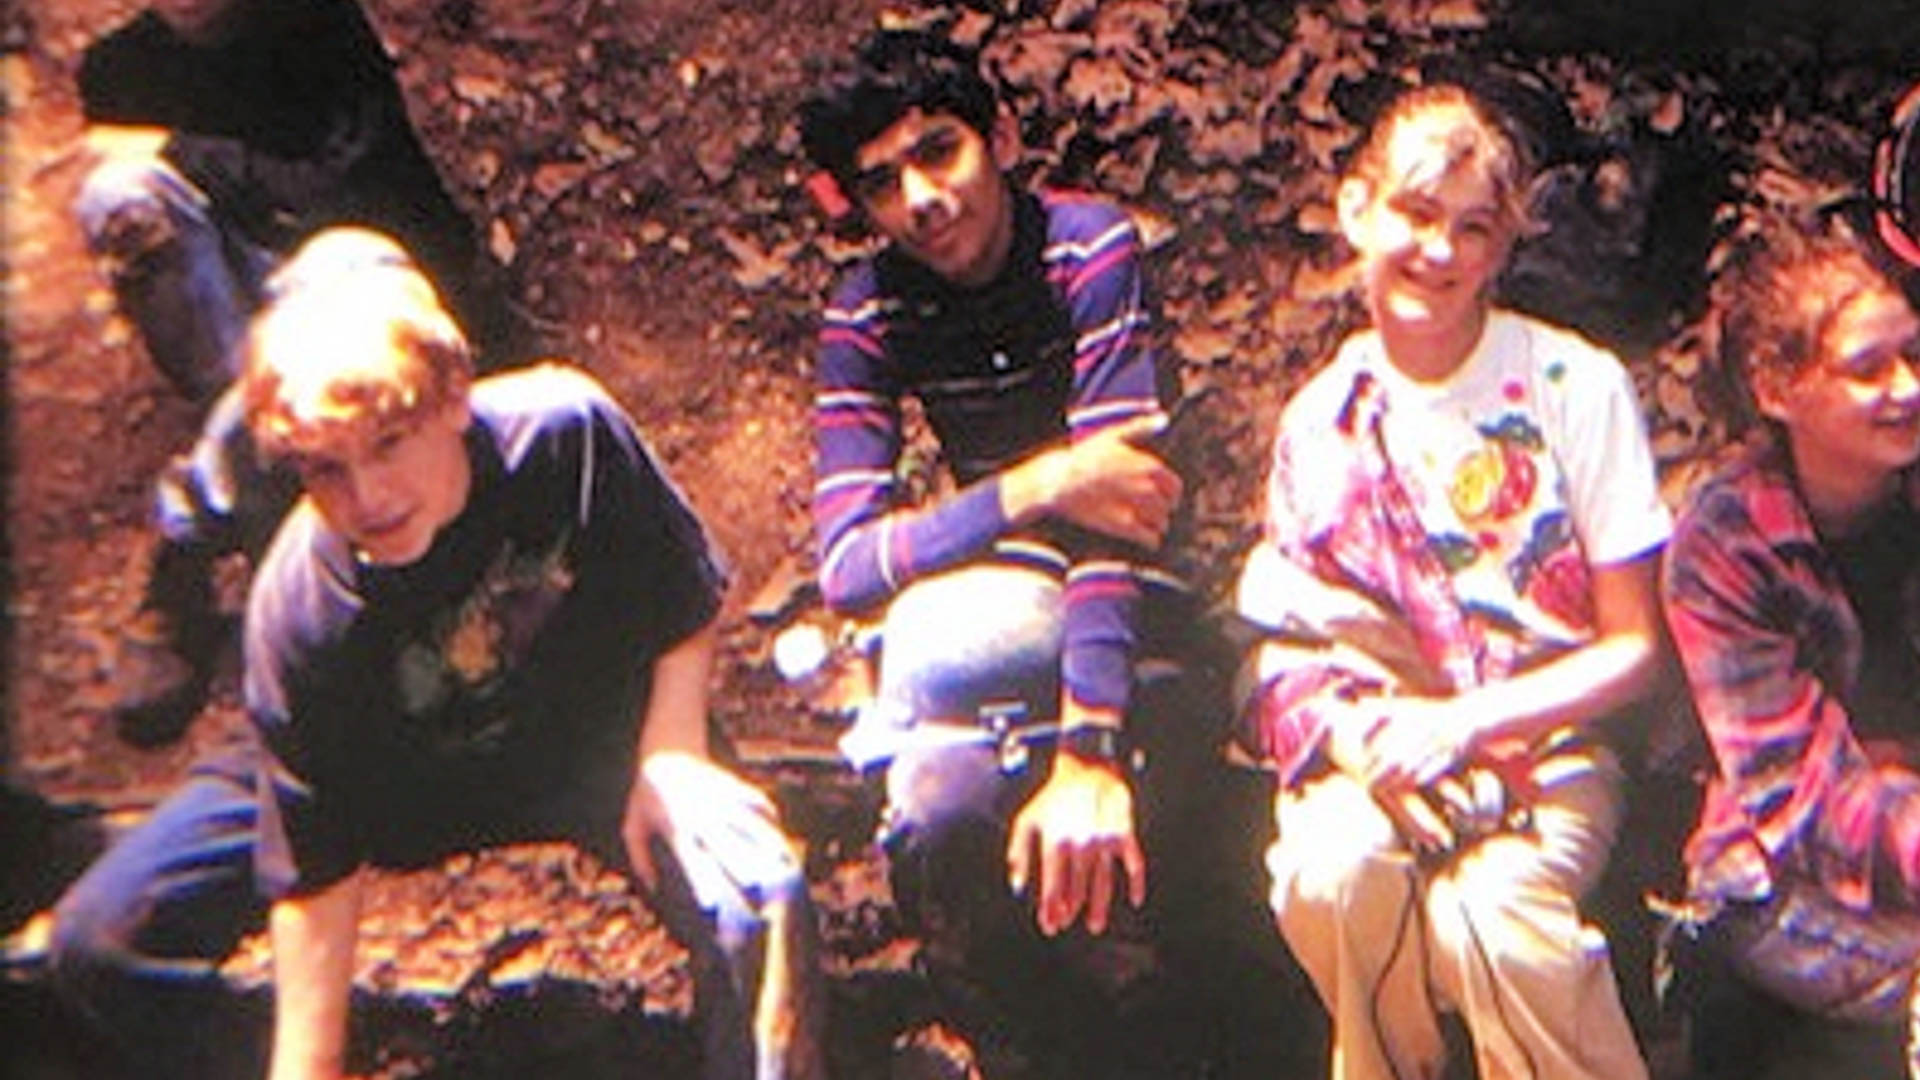 Me as a young teenager, wearing a striped shirt and with a gray hardhat on my lap, flanked by two other kids